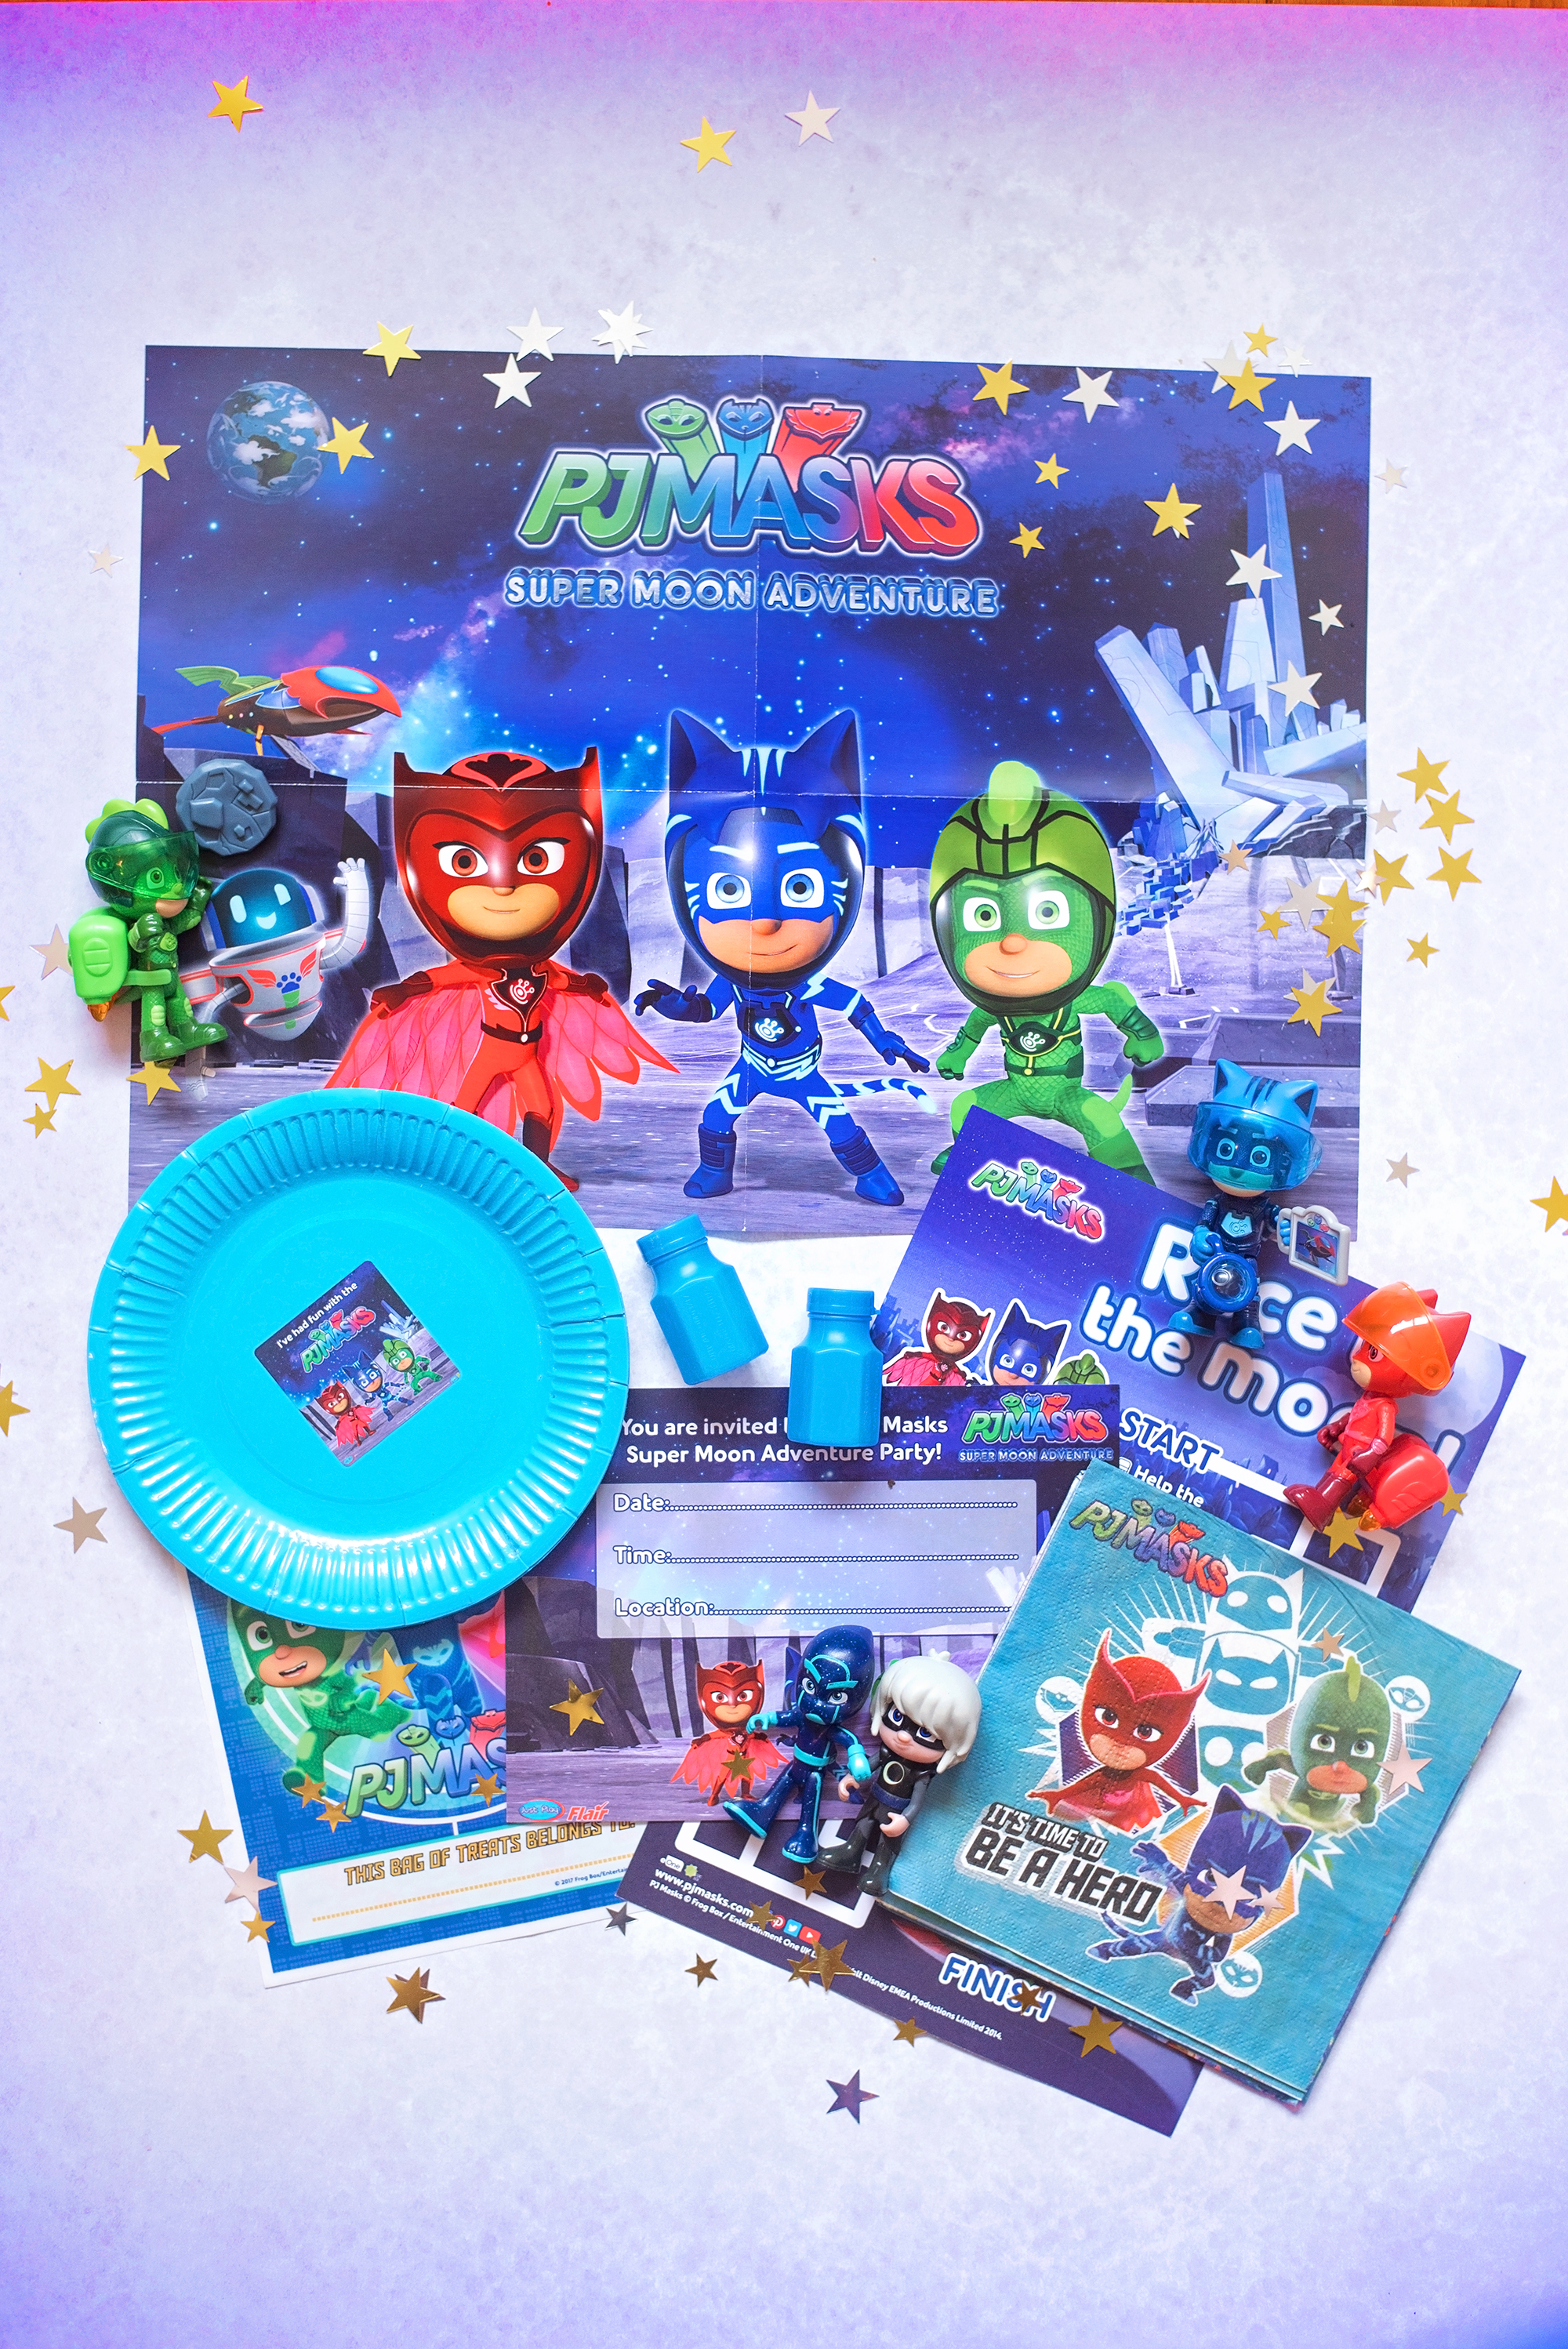 PJ MASKS SUPER MOON ADVENTURE PARTY DAY IS COMING!